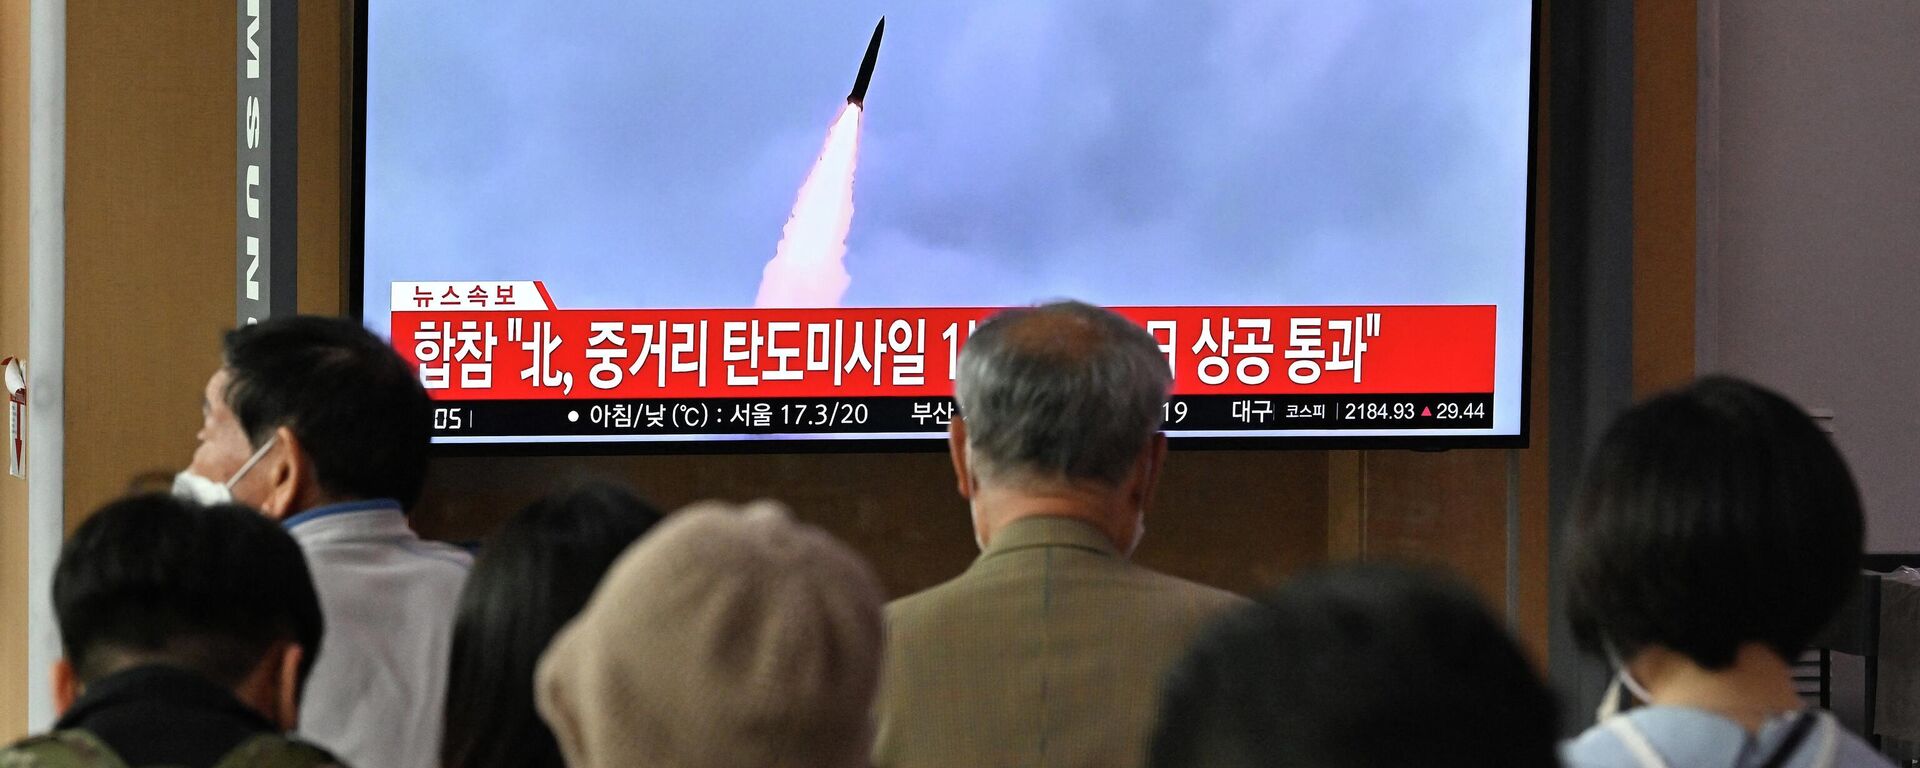 People watch a television screen showing a news broadcast with file footage of a North Korean missile test, at a railway station in Seoul on October 4, 2022 - Sputnik International, 1920, 26.10.2022